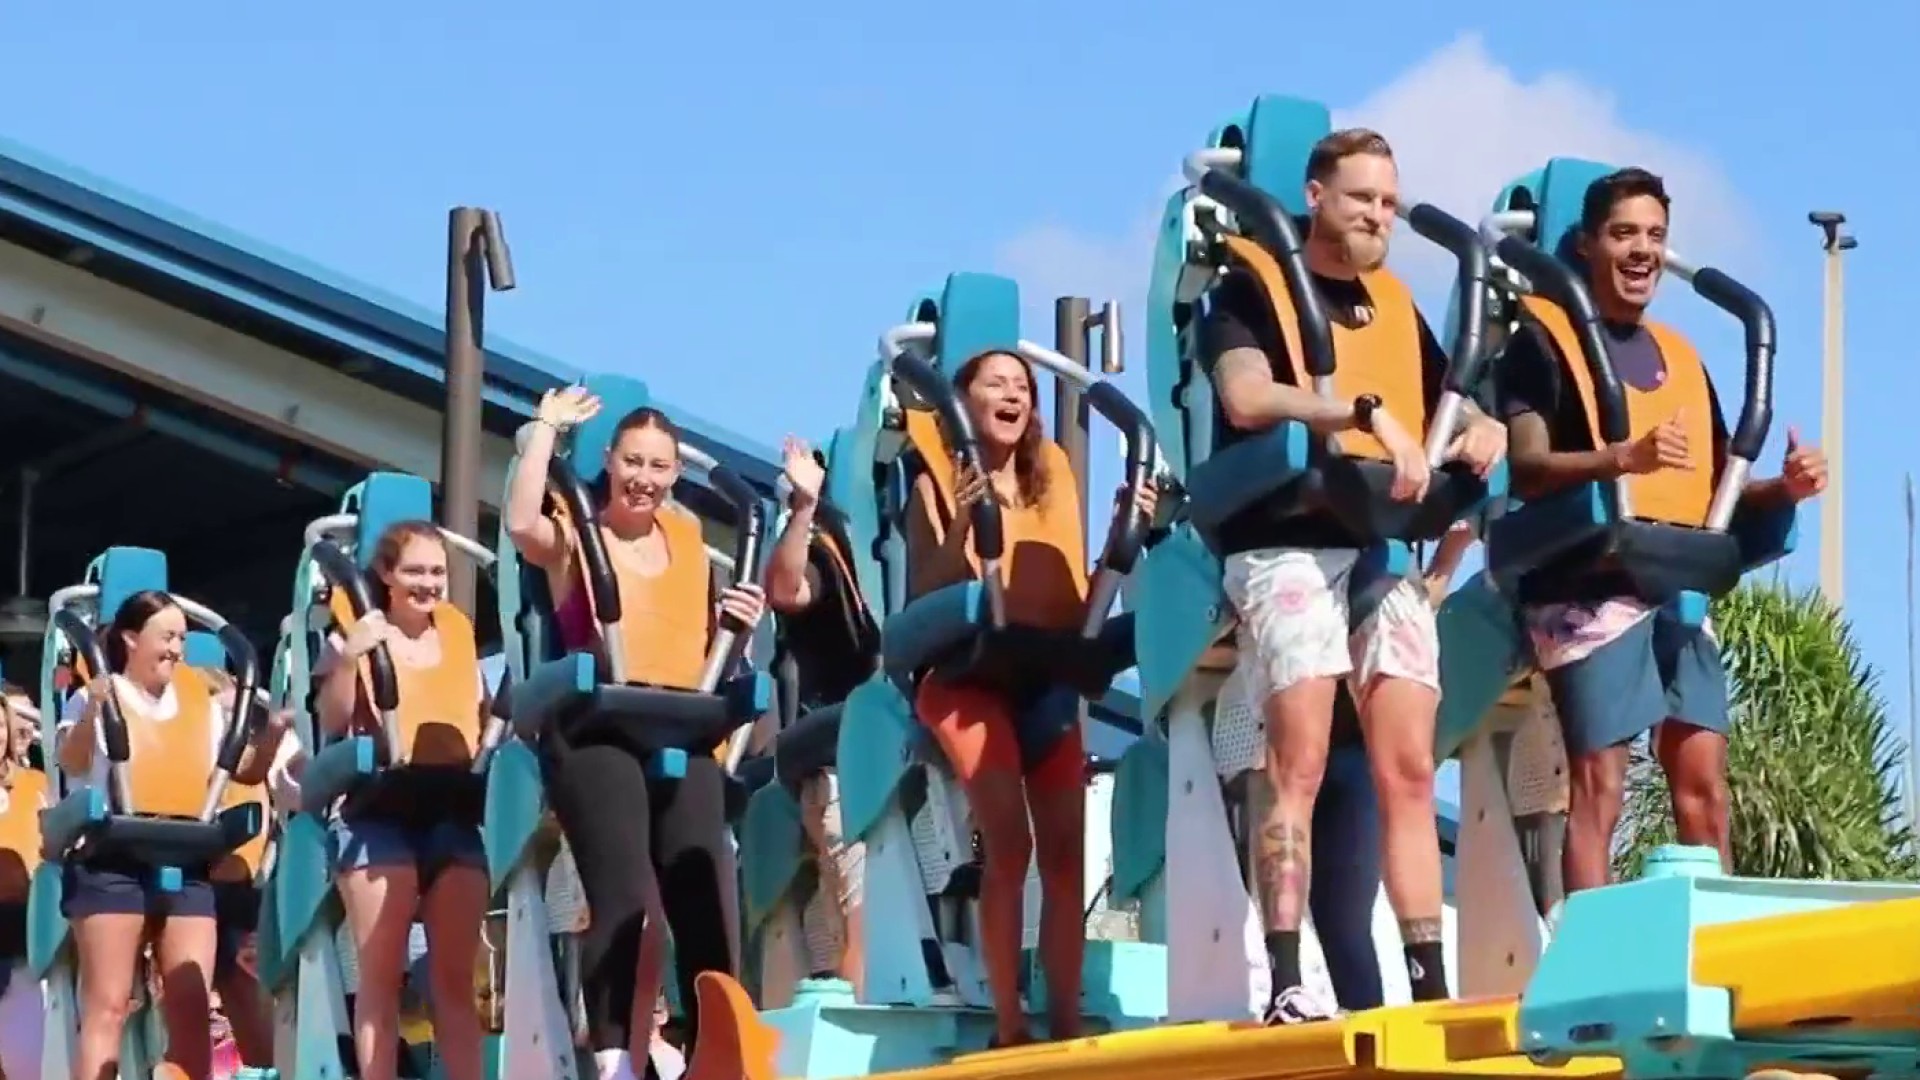 SeaWorld Orlando: Challenges on National Roller Coaster Day